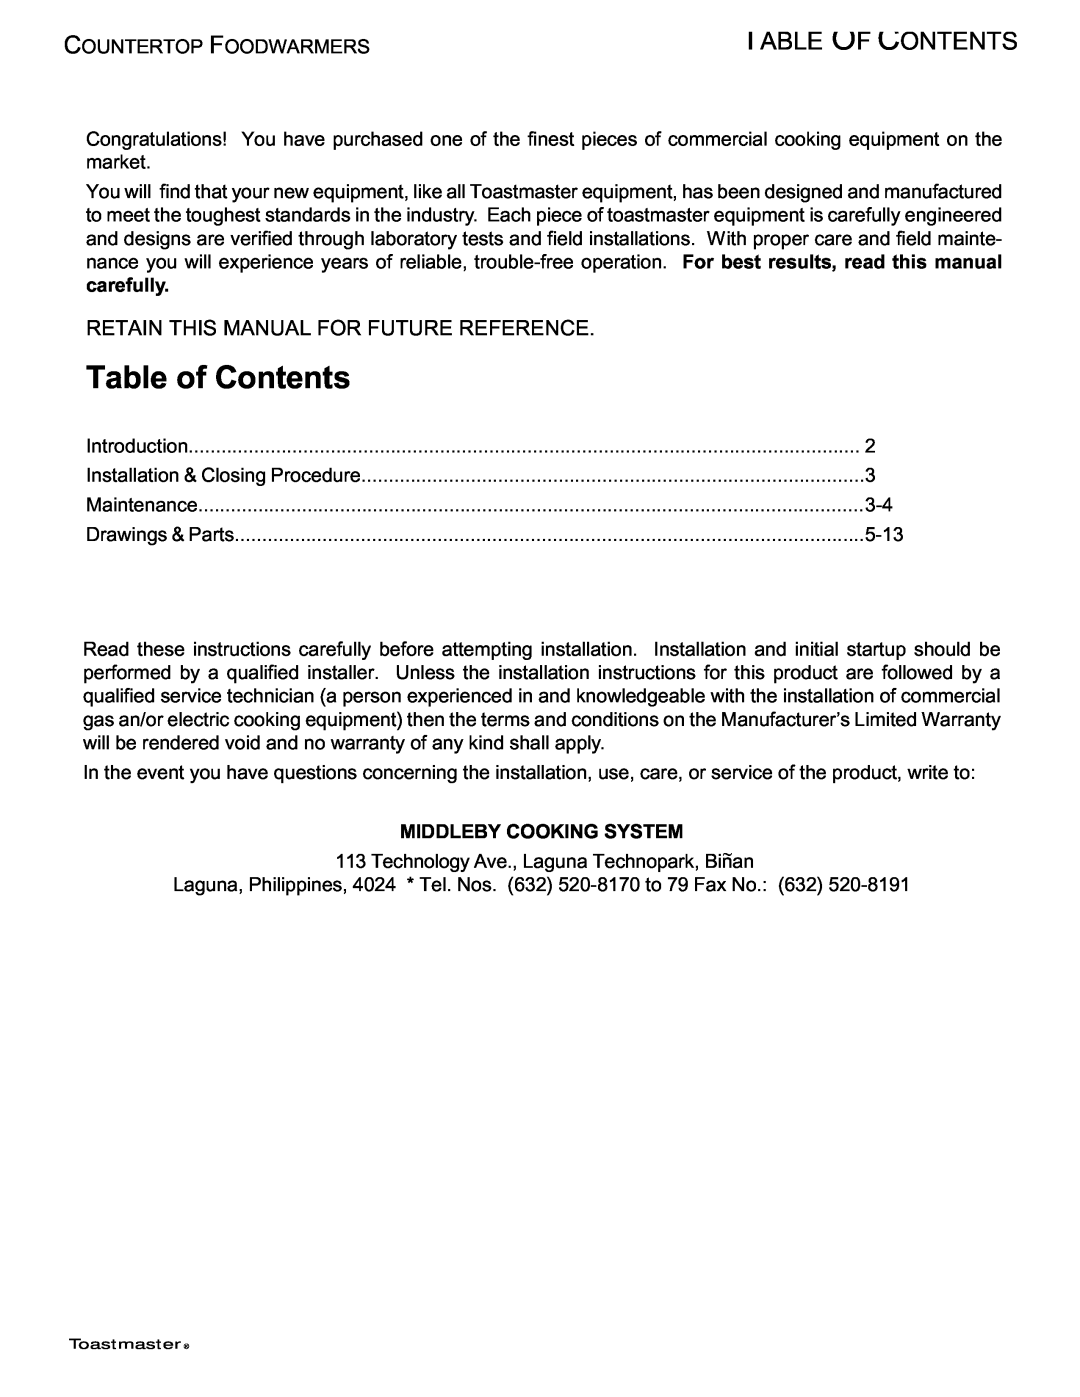 Toastmaster TECF1523, TECF1527, TECF1529 manual Table of Contents, Middleby Cooking System, Table Of Contents 